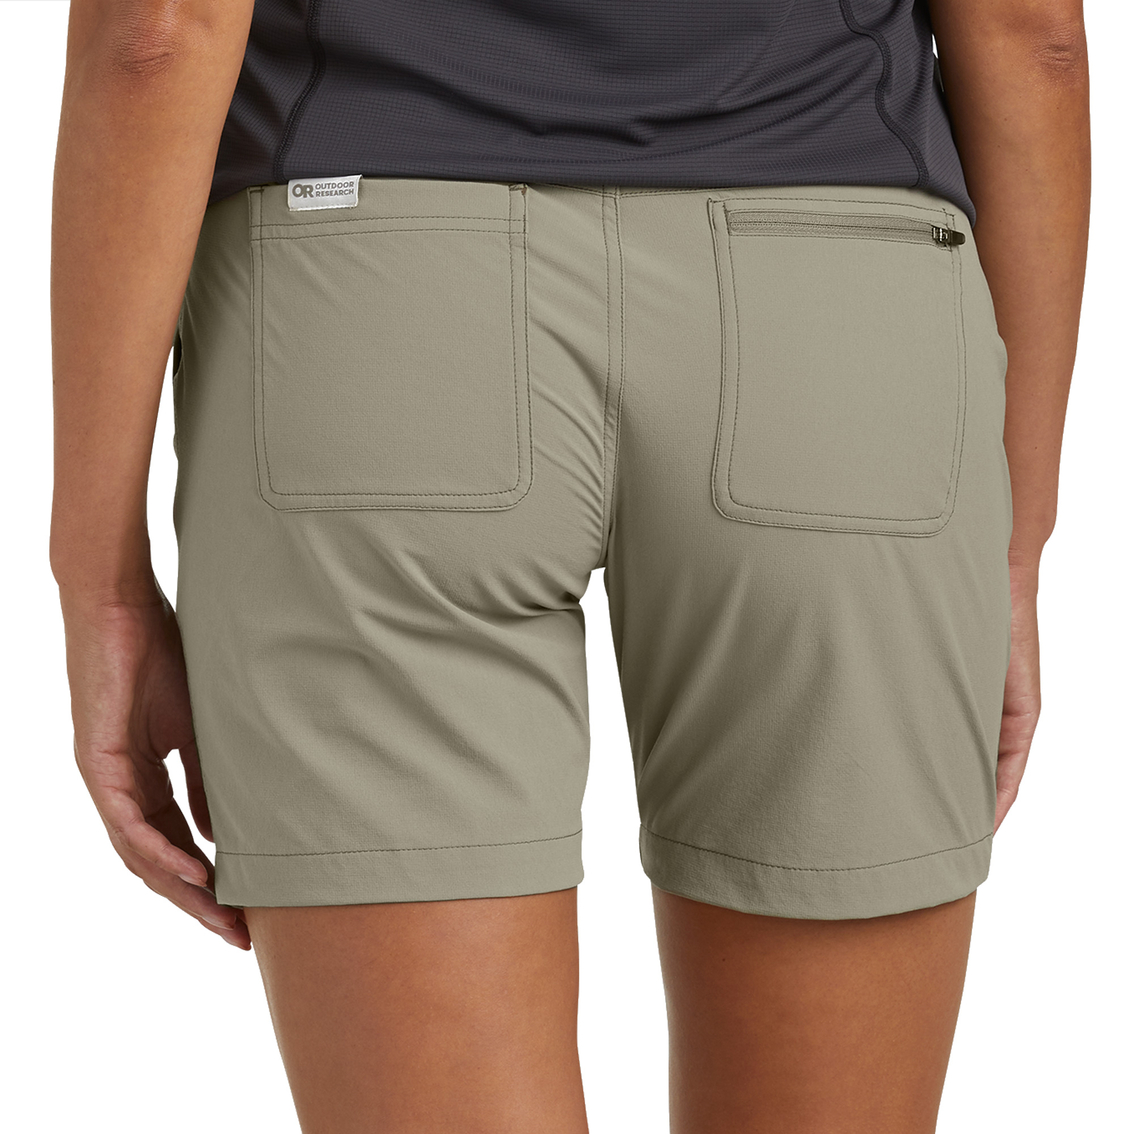 Outdoor Research Ferrosi 7 in. Shorts - Image 2 of 2